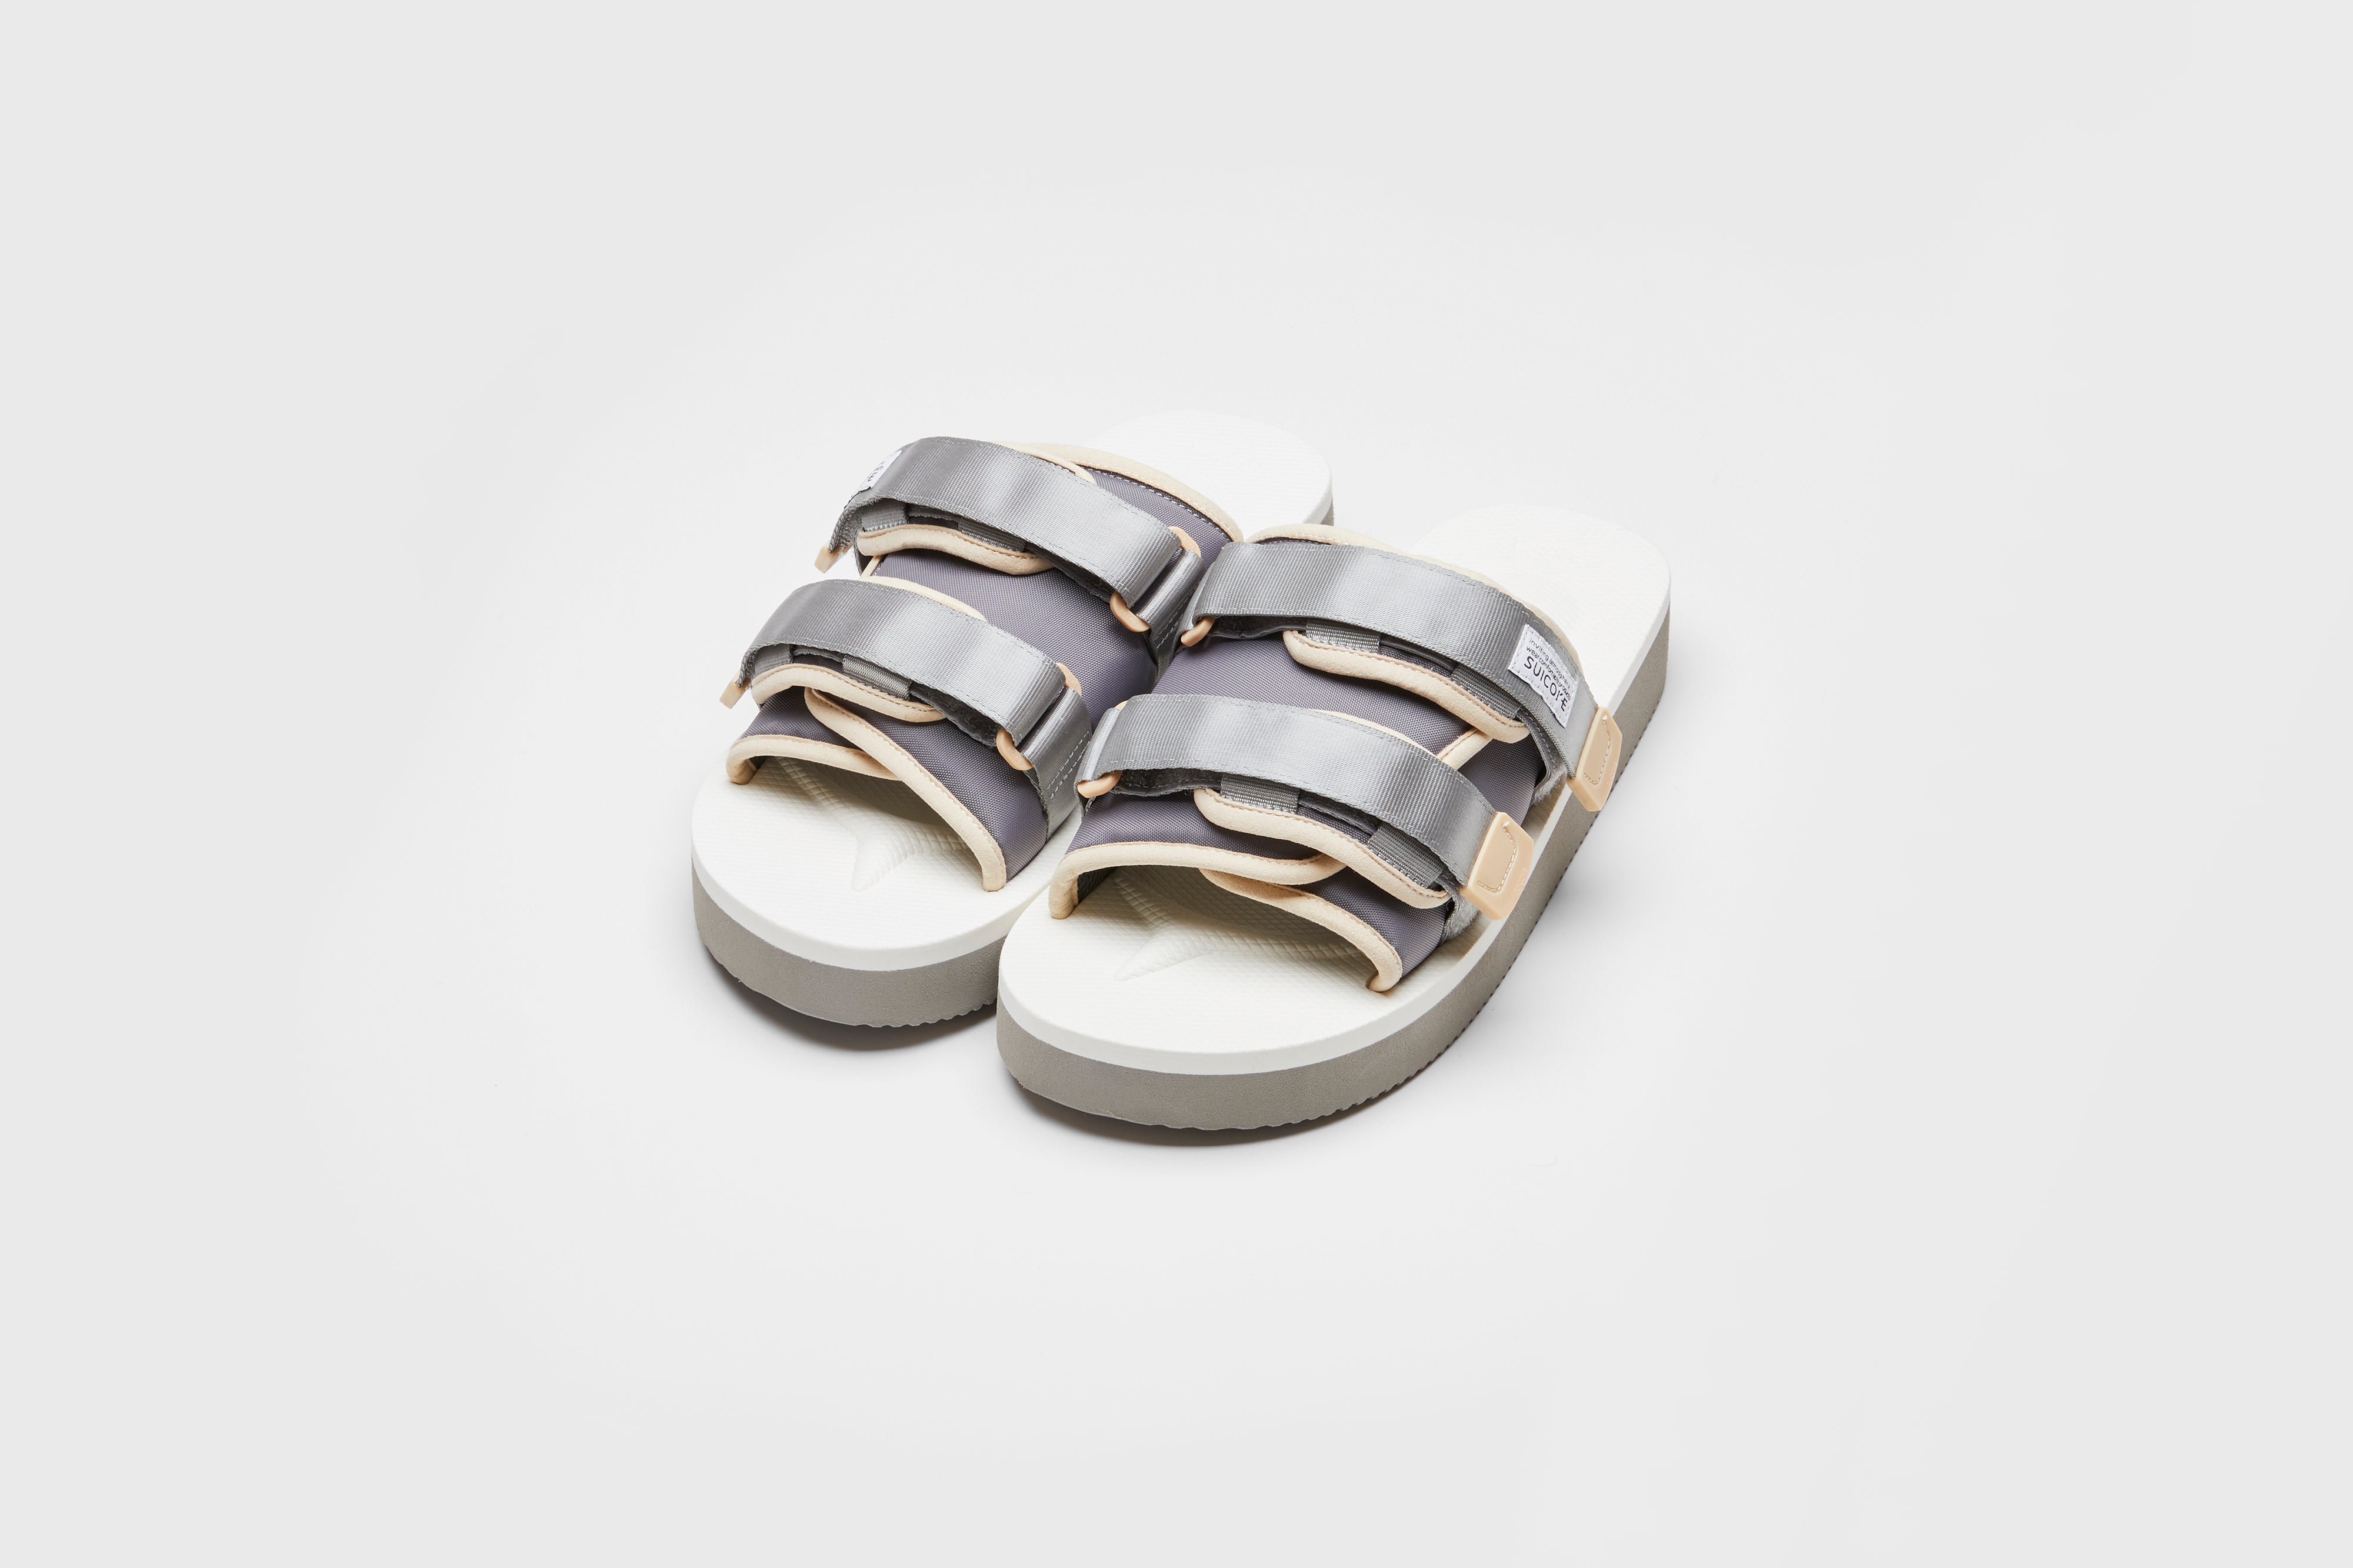 SUICOKE MOTO-PO slides with gray &amp; white nylon upper, gray &amp; white midsole and sole, strap and logo patch. From Spring/Summer 2023 collection on eightywingold Web Store, an official partner of SUICOKE. OG-056PO GRAY X WHITE